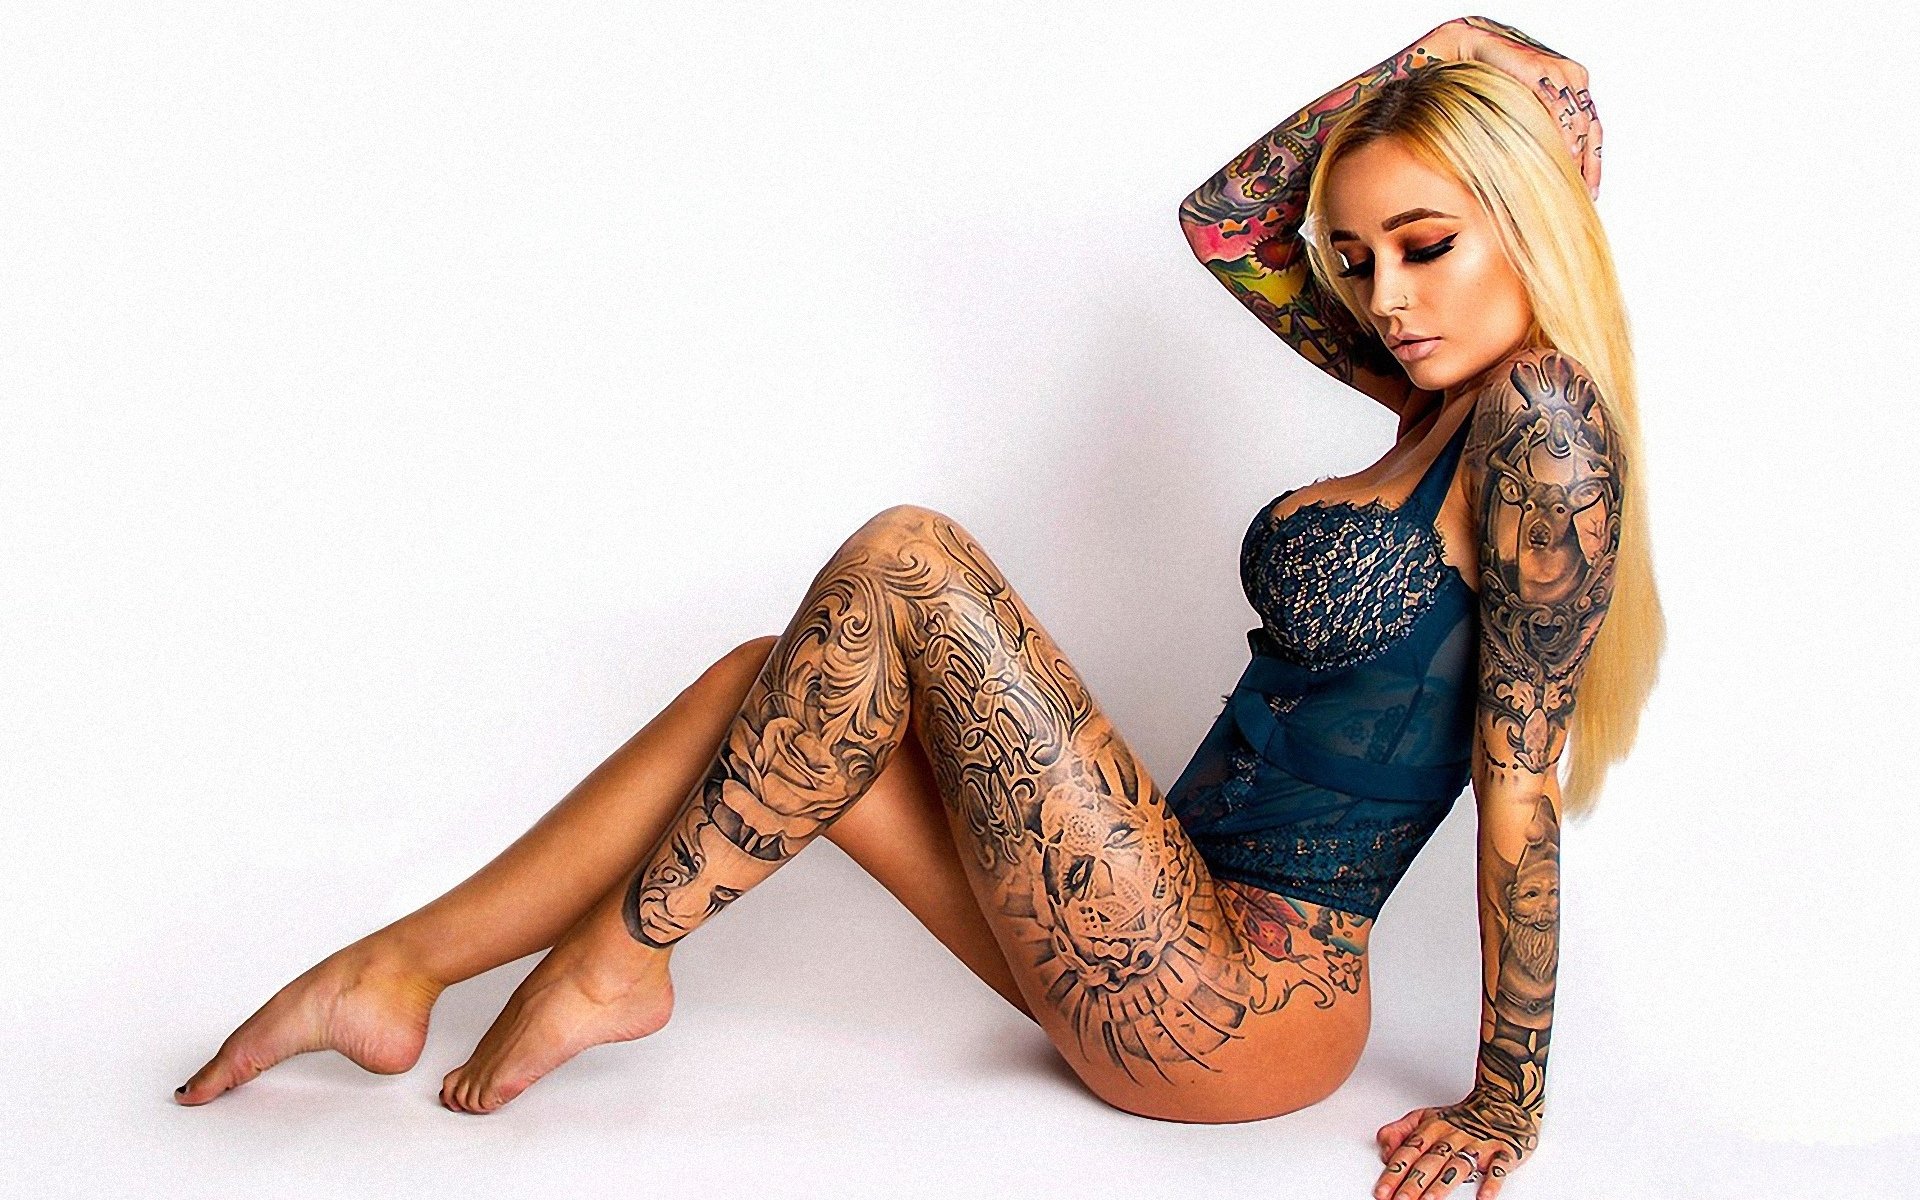 Hot models with tattoos